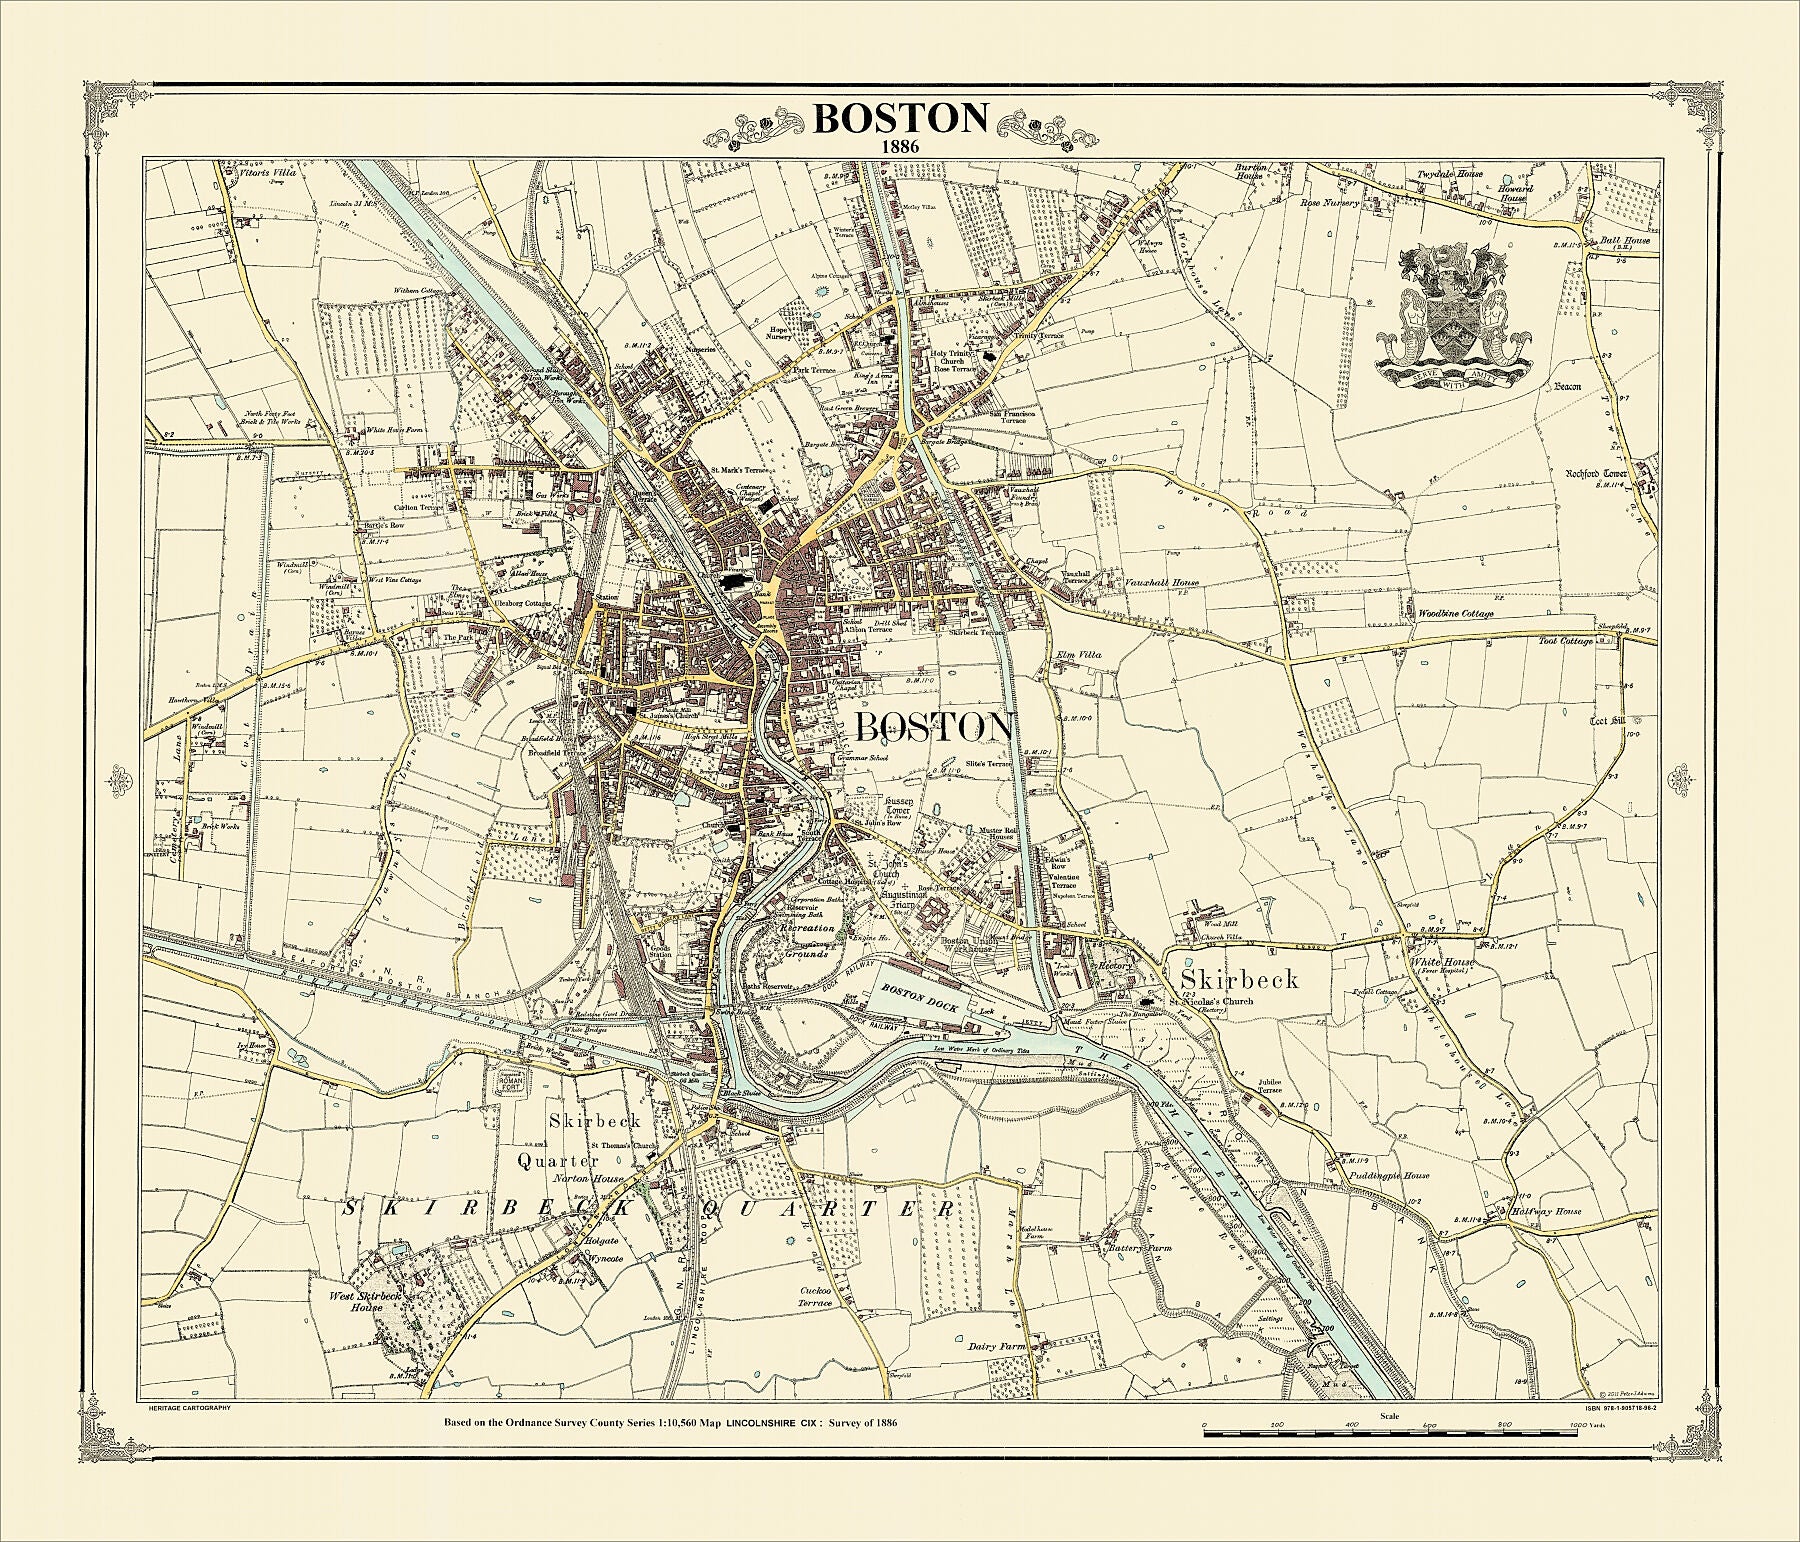 Coloured Victorian map of Boston in 1886 by Peter J Adams of Heritage Cartography